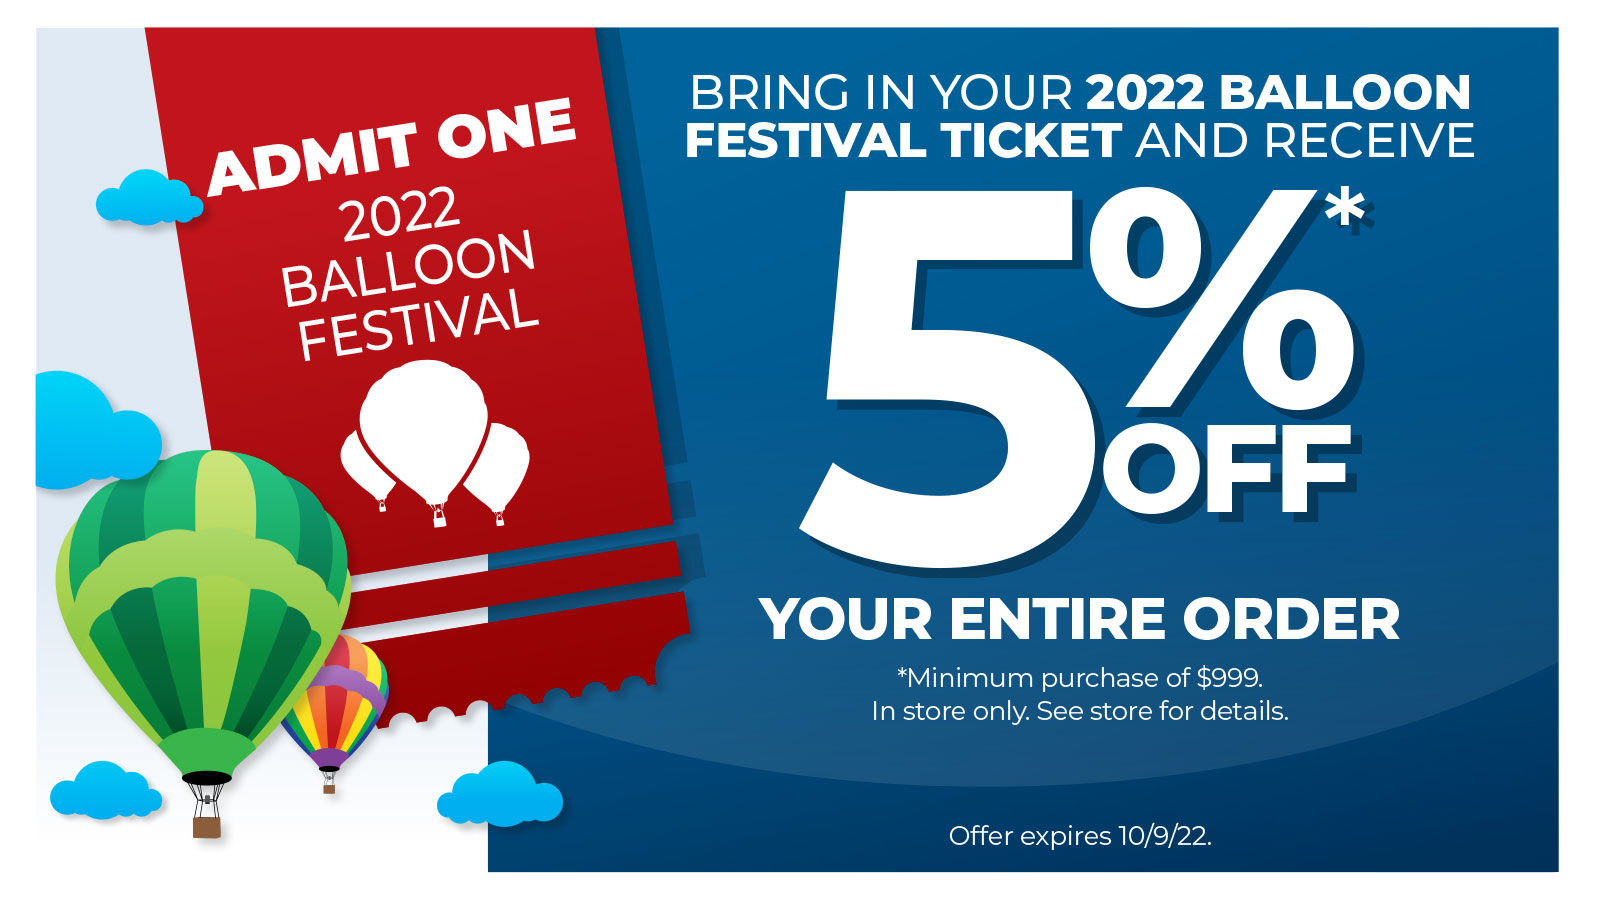 Bring in Your 2022 Balloon Fest Ticket and receive 5% off your entire order